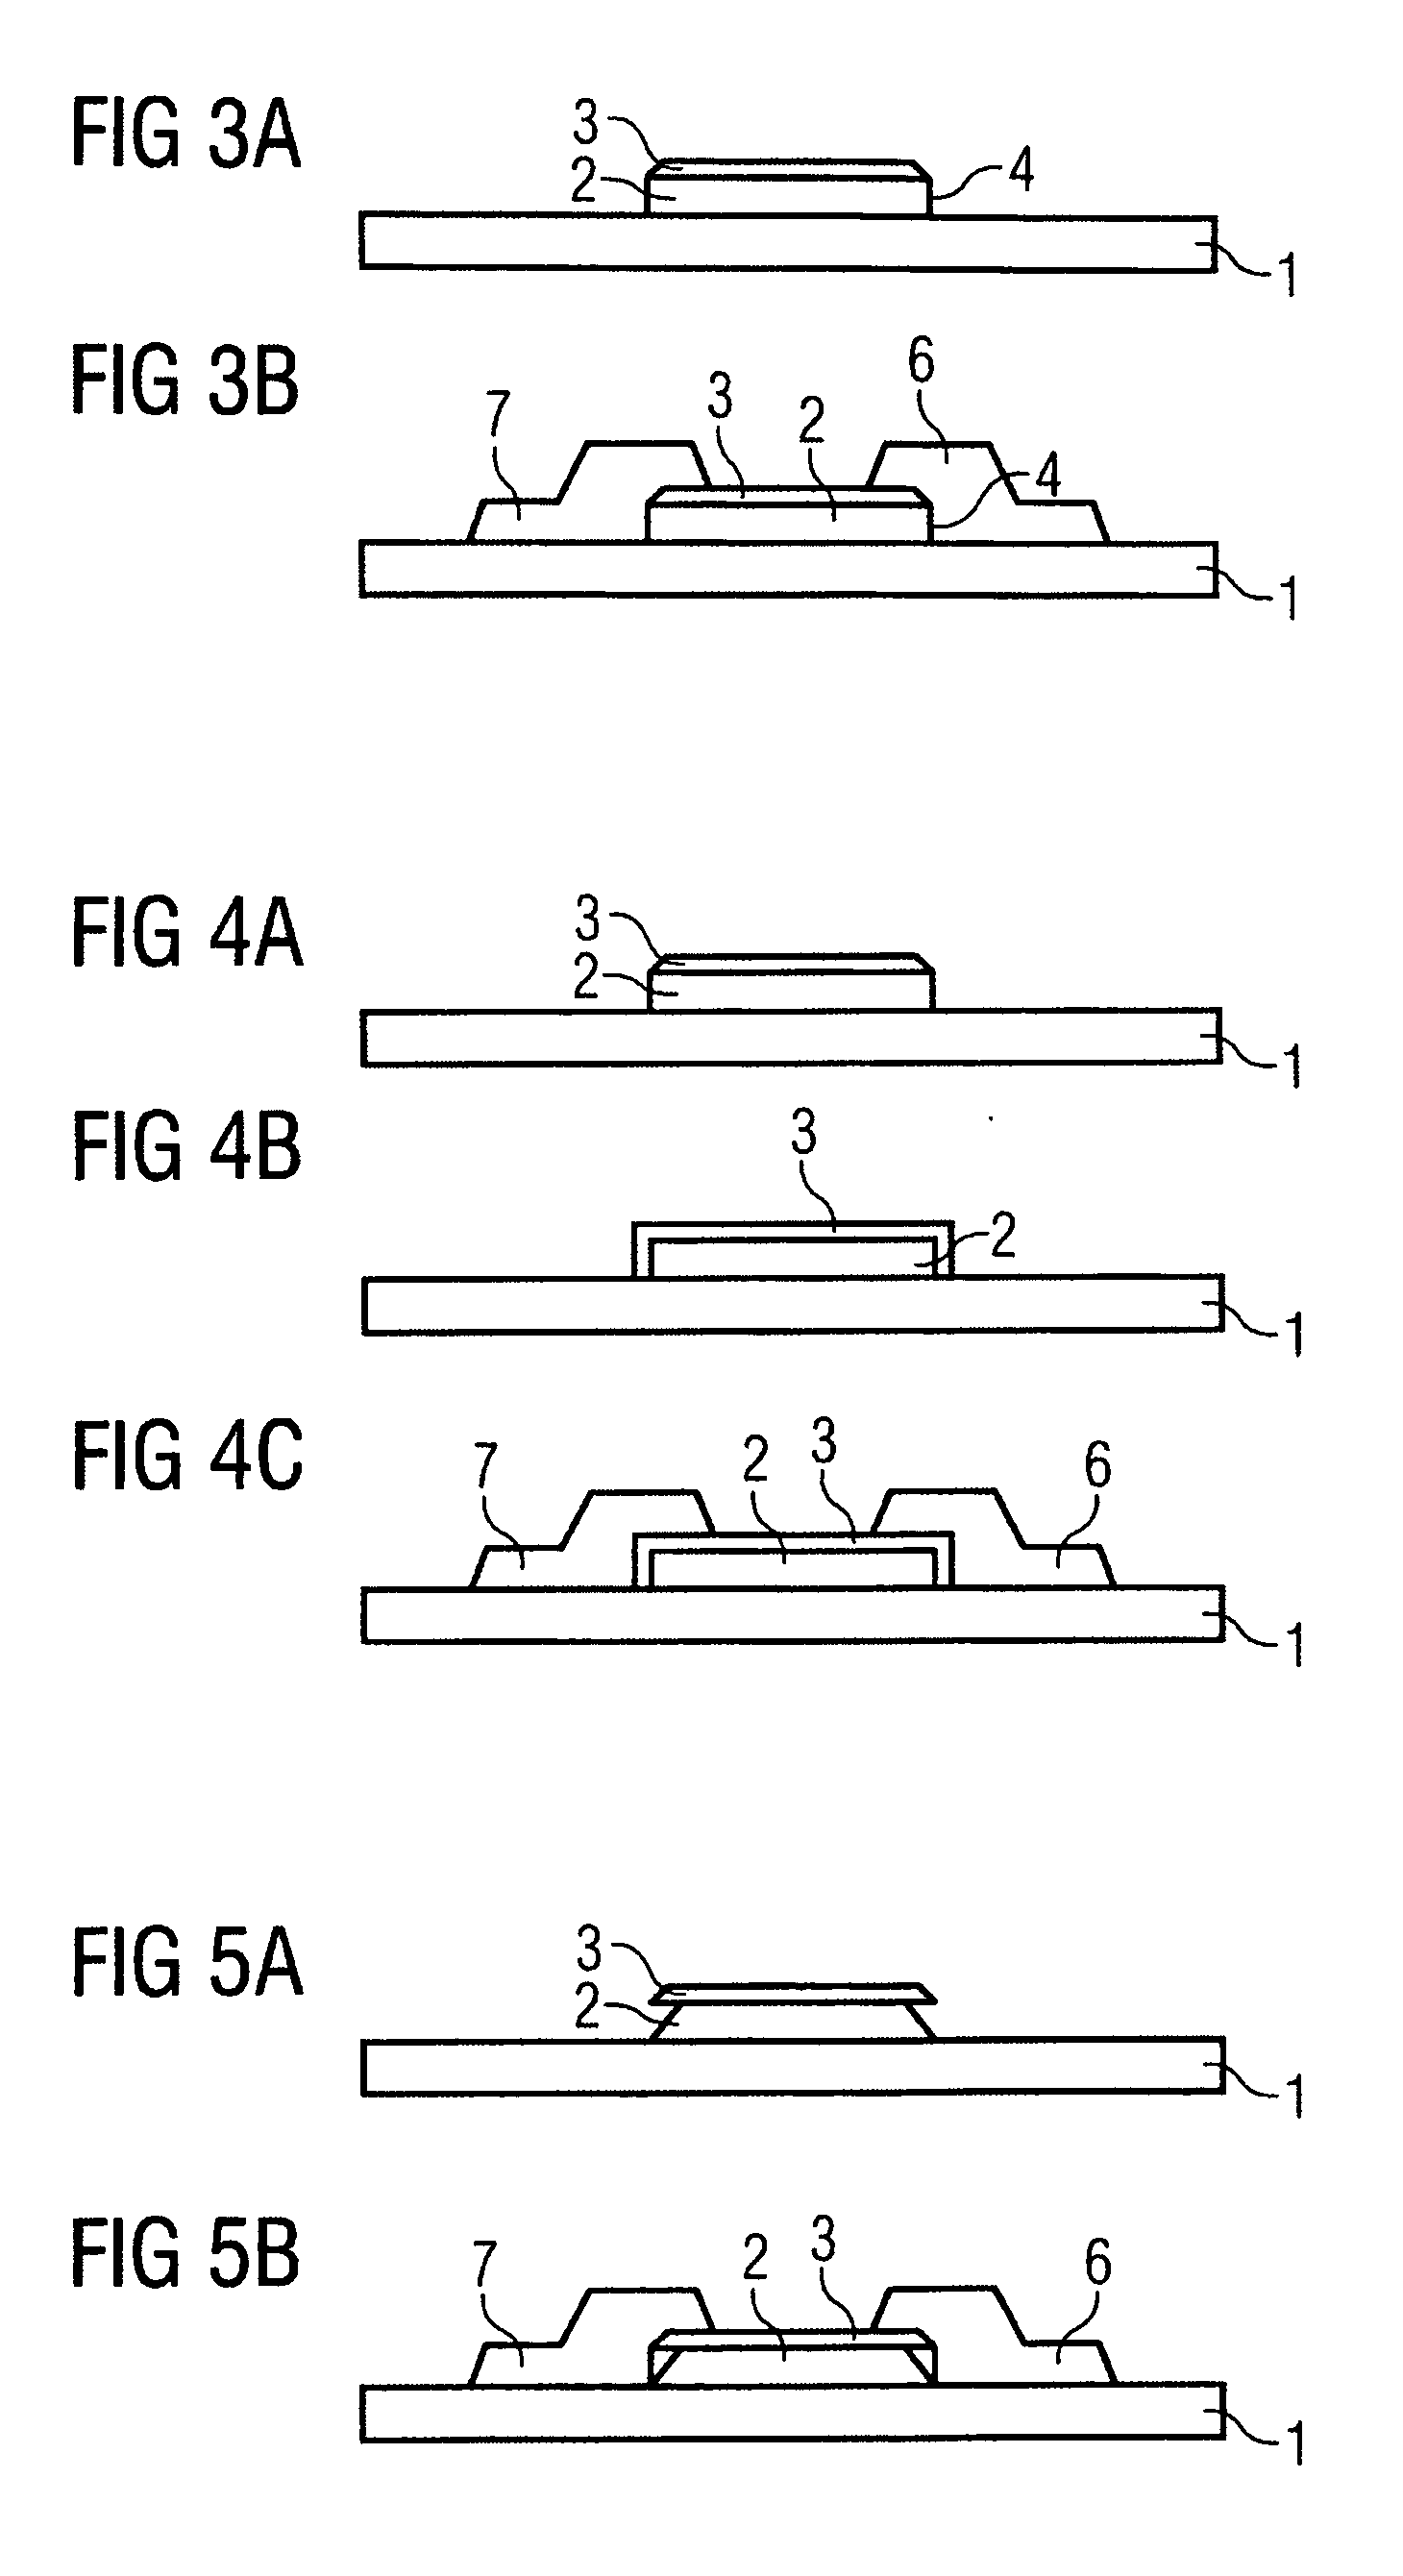 Method for fabricating a field effect transistor